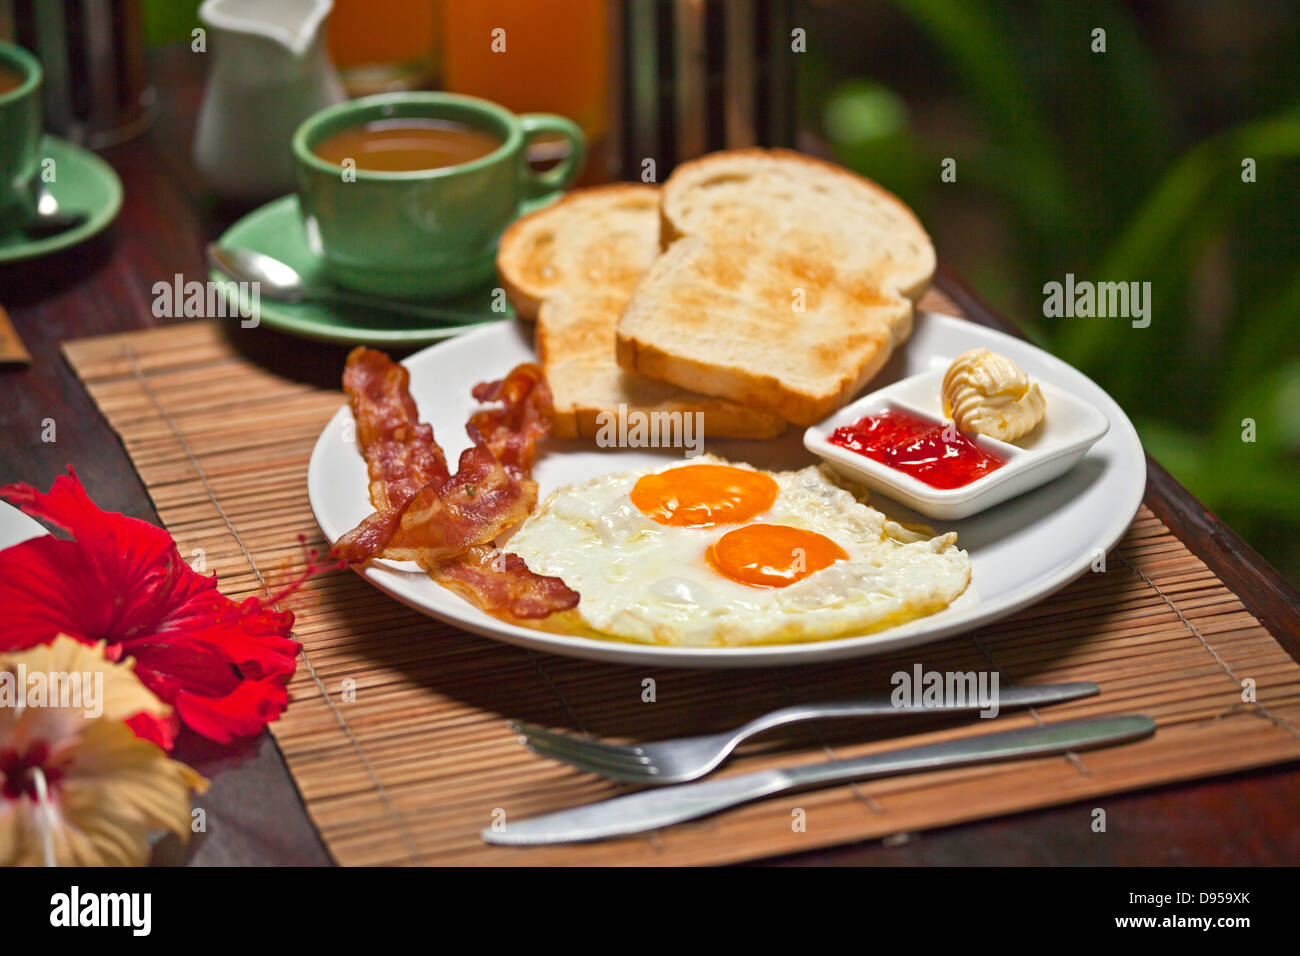 An AMERICAN BREAKFAST served at OUR JUNGLE HOUSE a lodge in the rainforest near KHAO SOK NATIONAL PARK - SURATHANI PROVENCE, THA Stock Photo